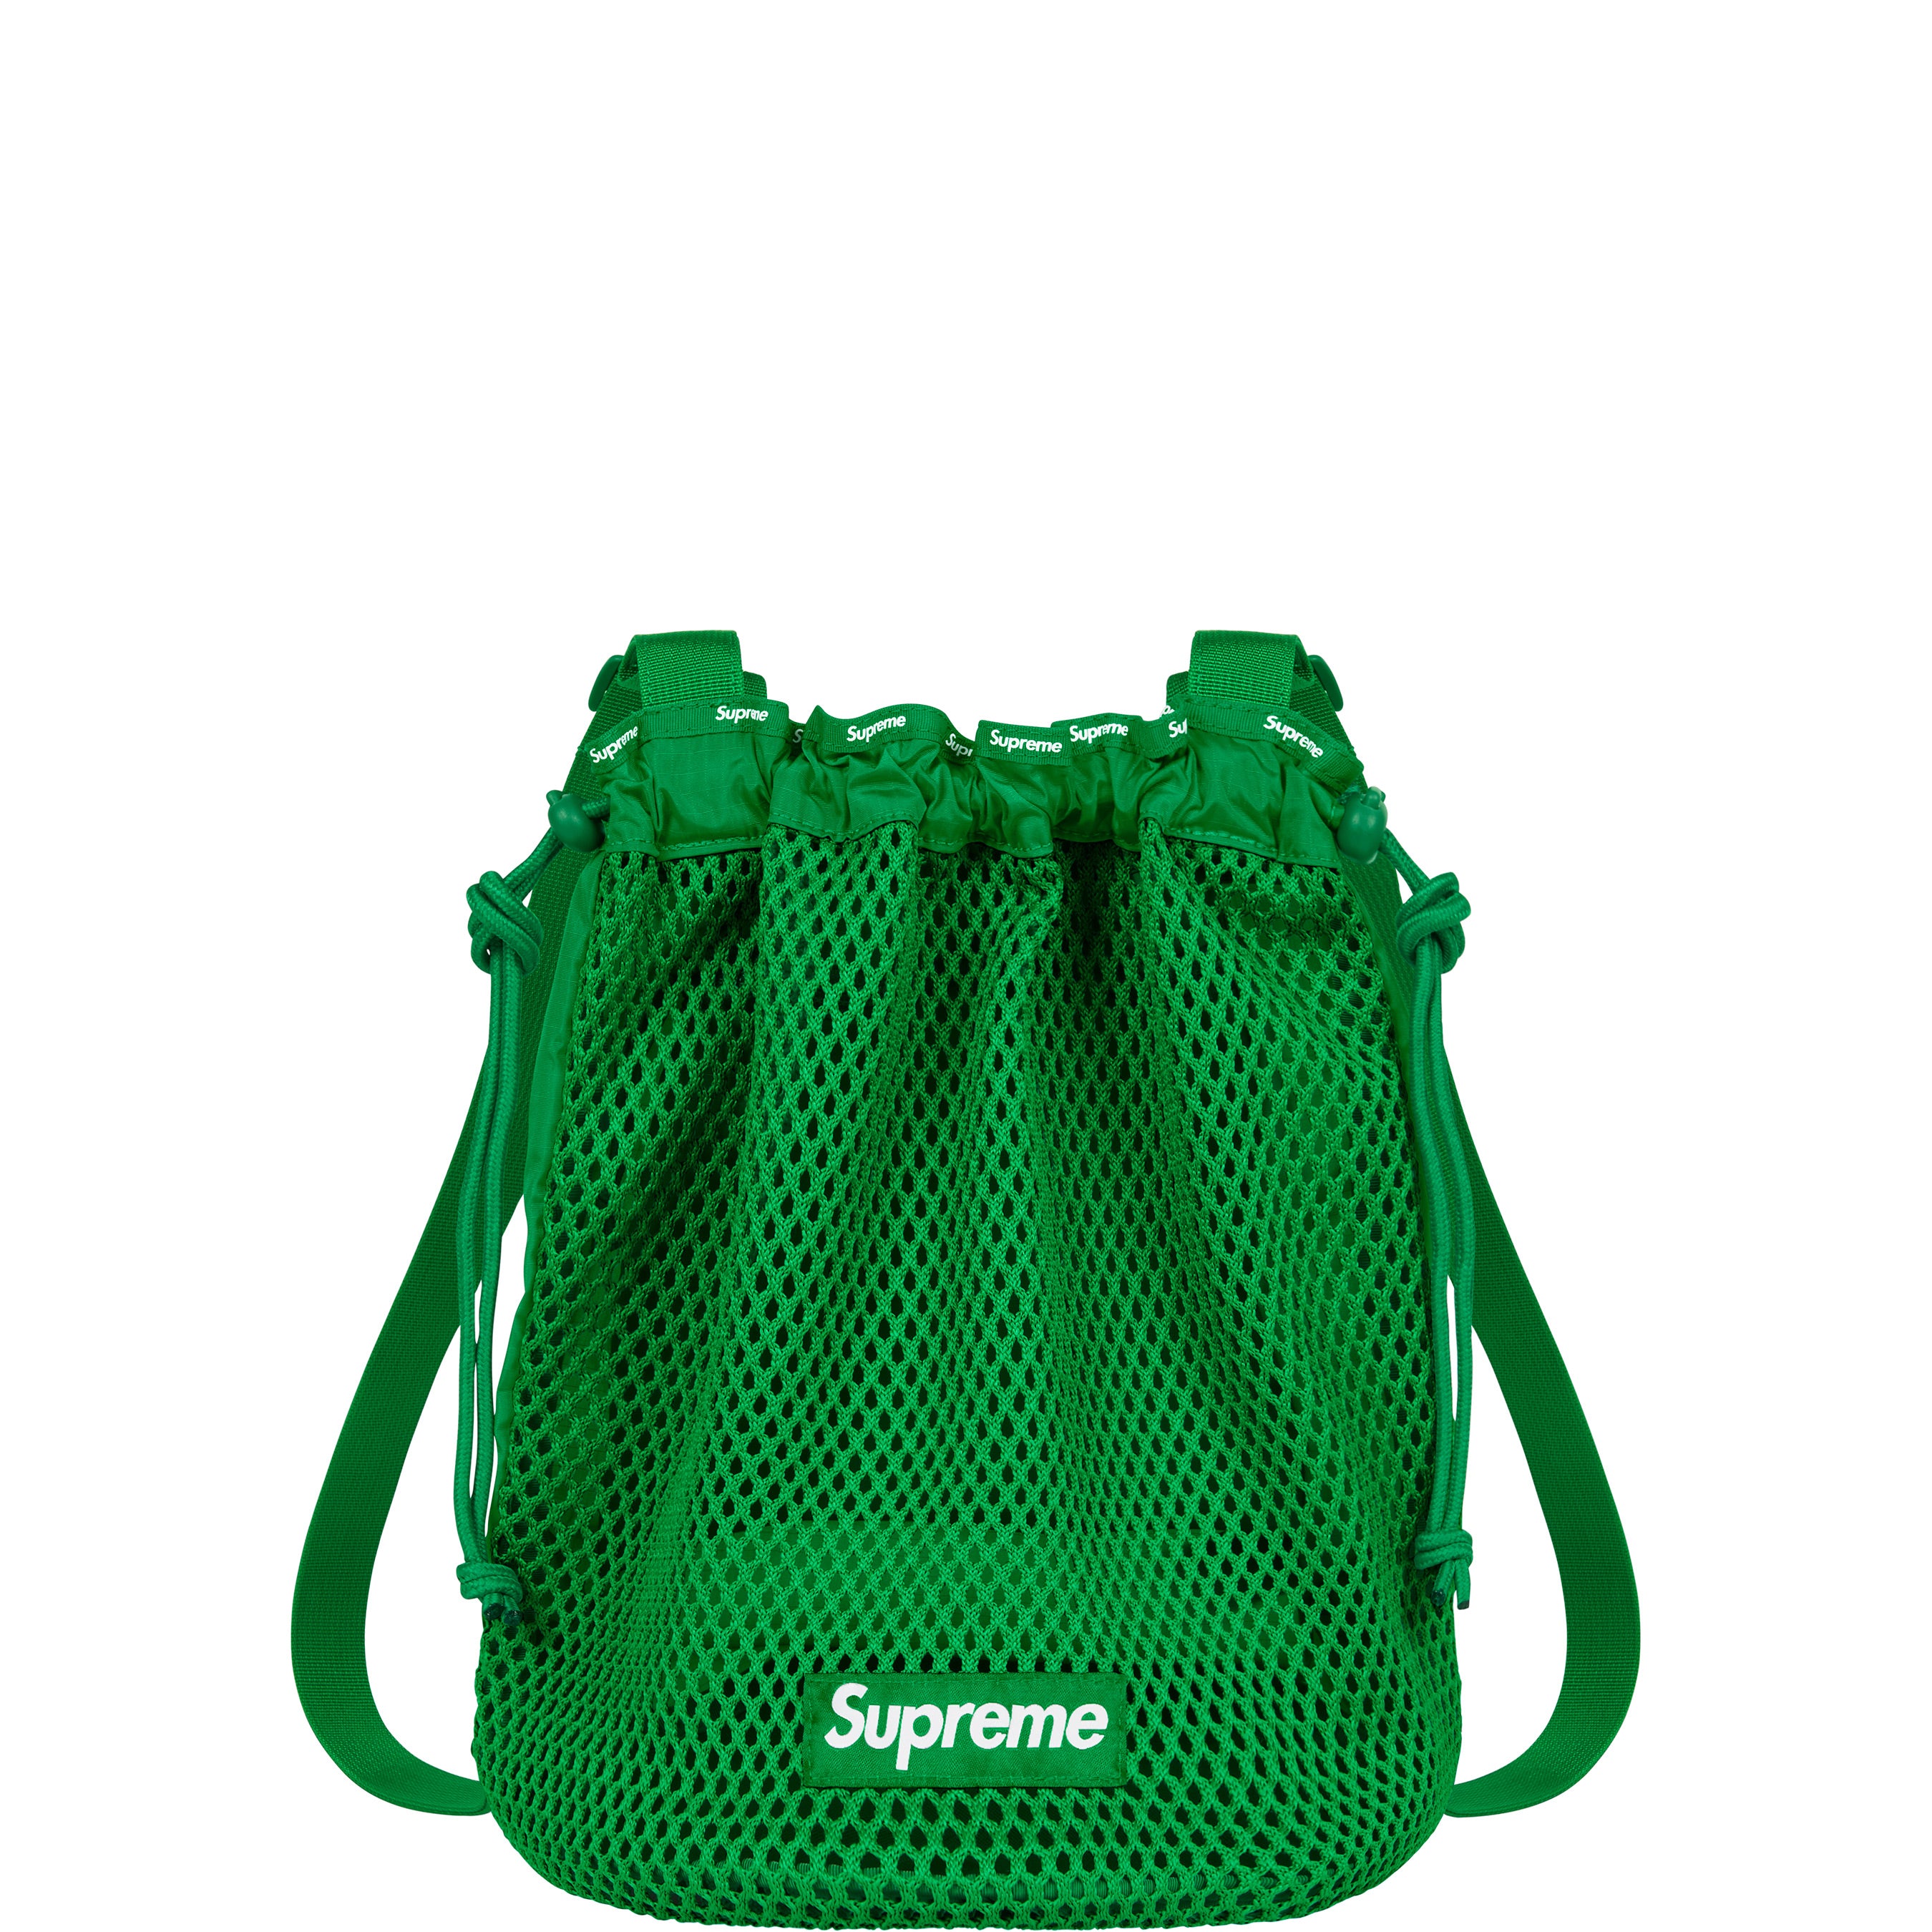 Supreme Mesh Small Backpack Green, 42% OFF